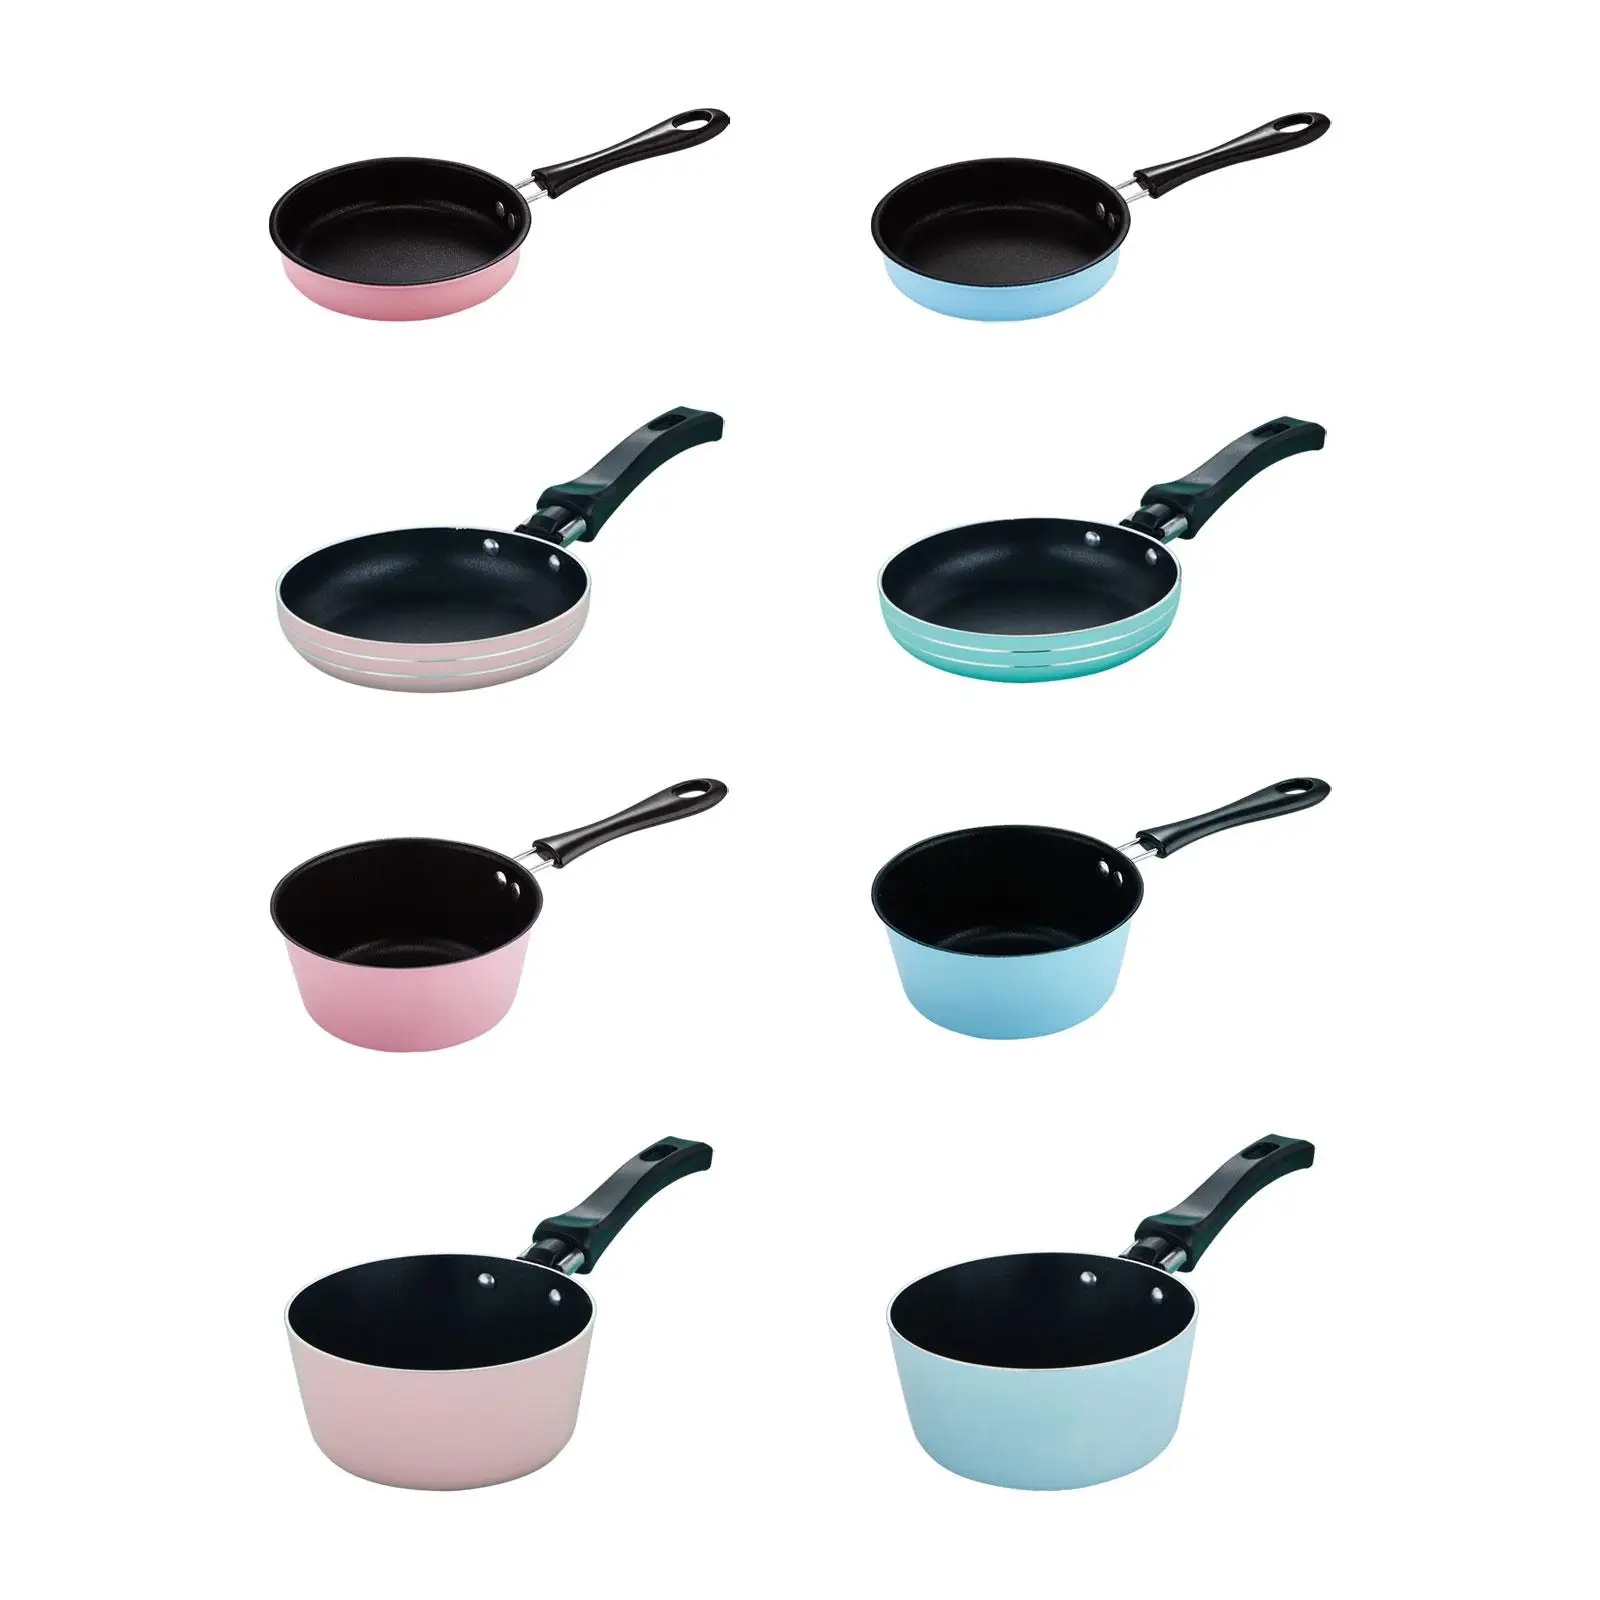 Mini Pan Metal Induction Pan Skillet with Long Handle for Kids Cooking Toy Small Pan for Toddlers Children Ages 3 Years and up